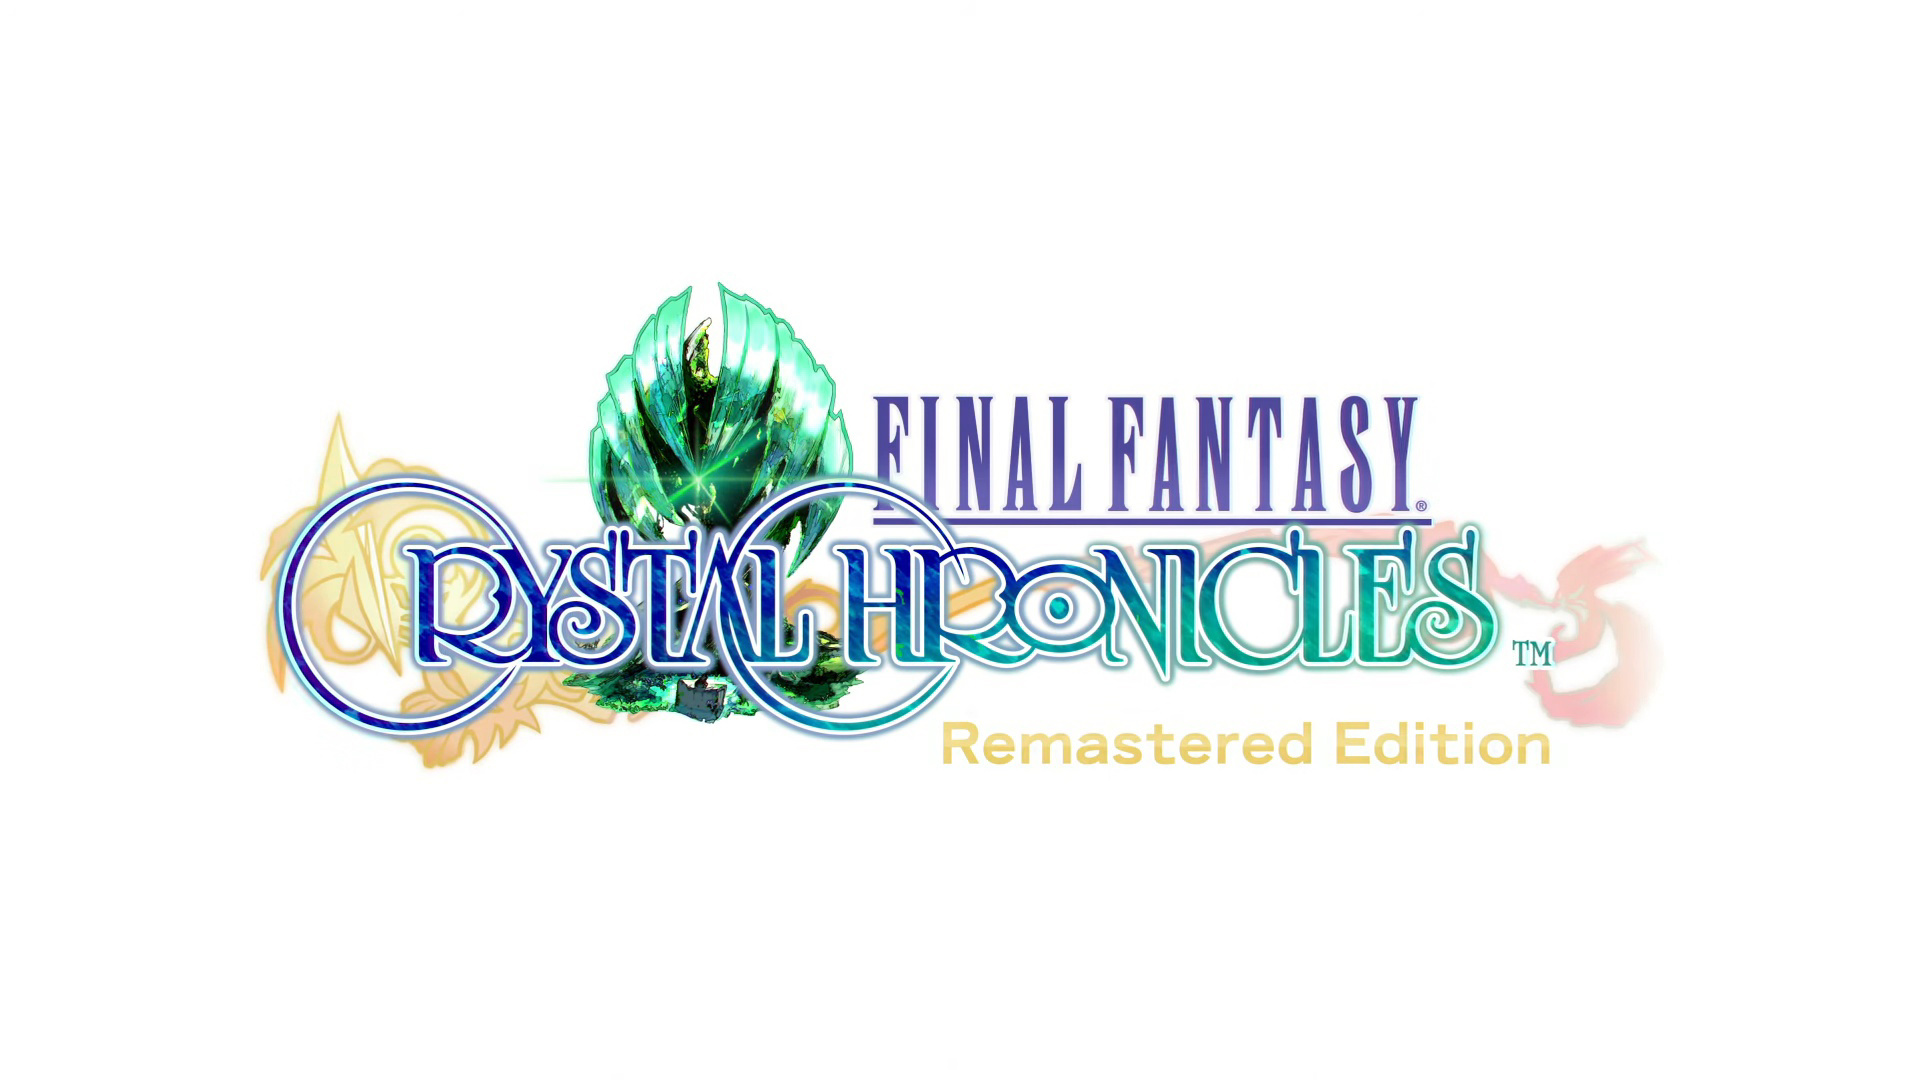 Image of the upcoming Final Fantasy Crystal Chronicles Remastered Edition